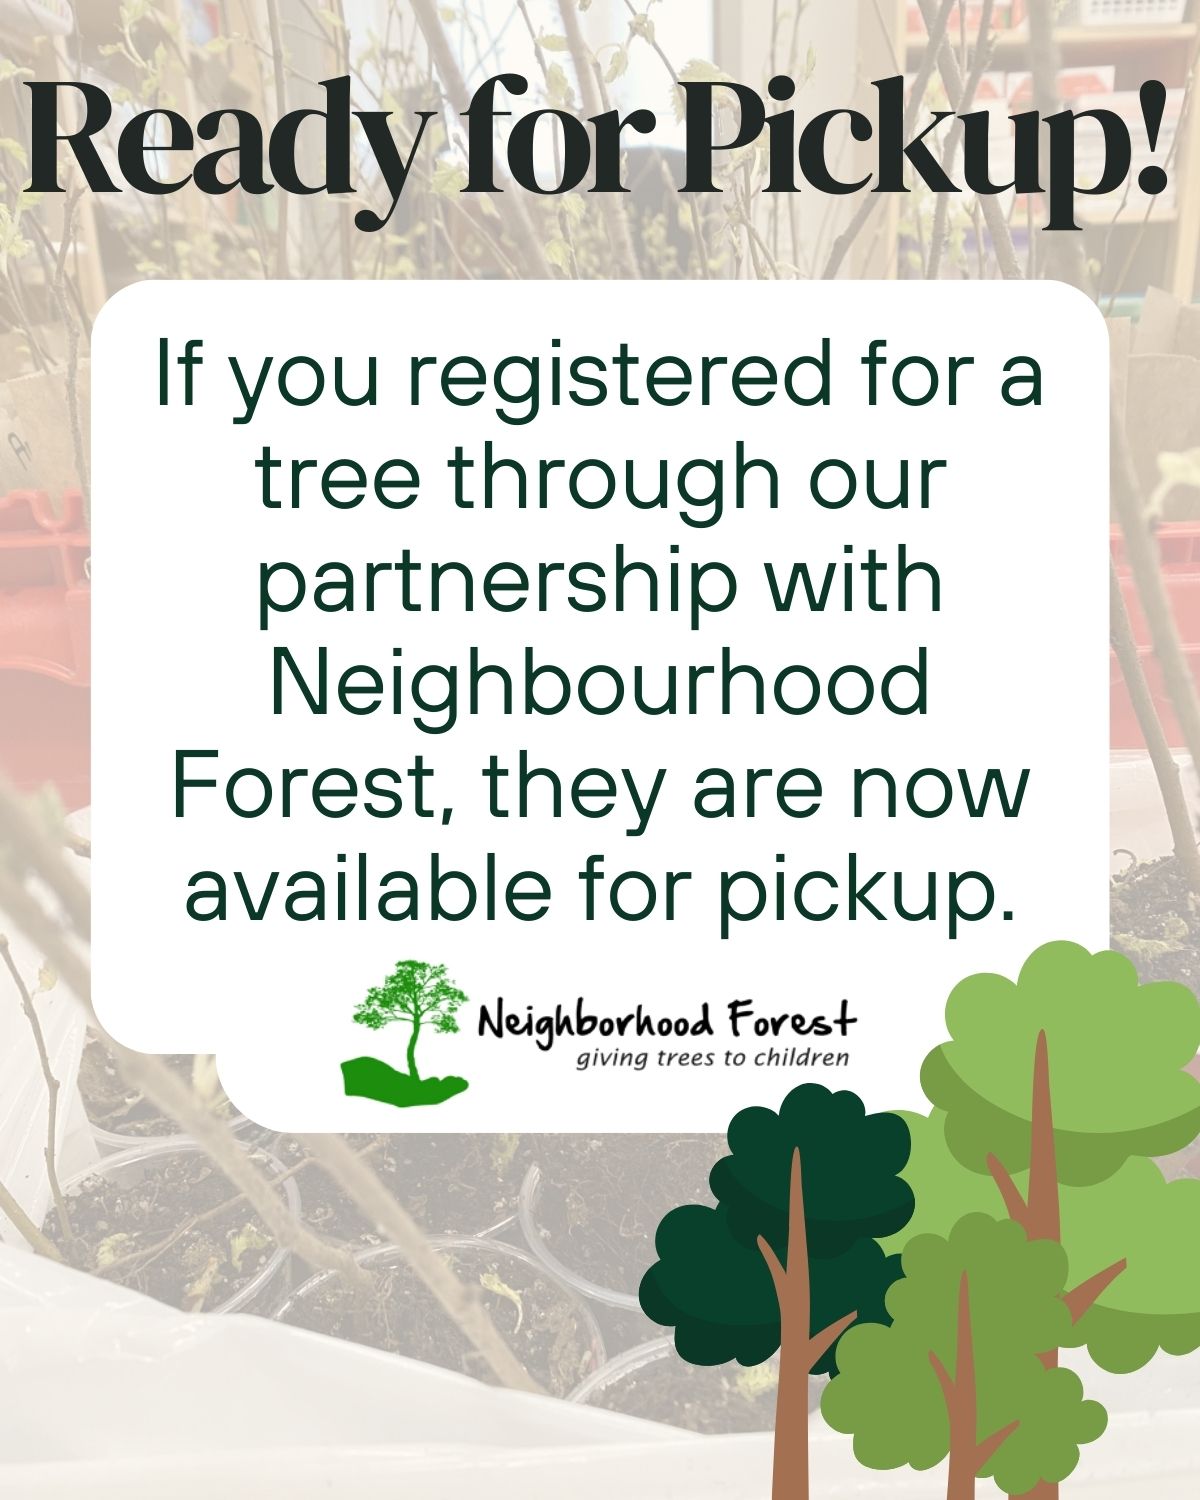 Trees are ready for pickup! If you registered for a tree through our partnership with Neighbourhood Forest, they are now available for pickup.